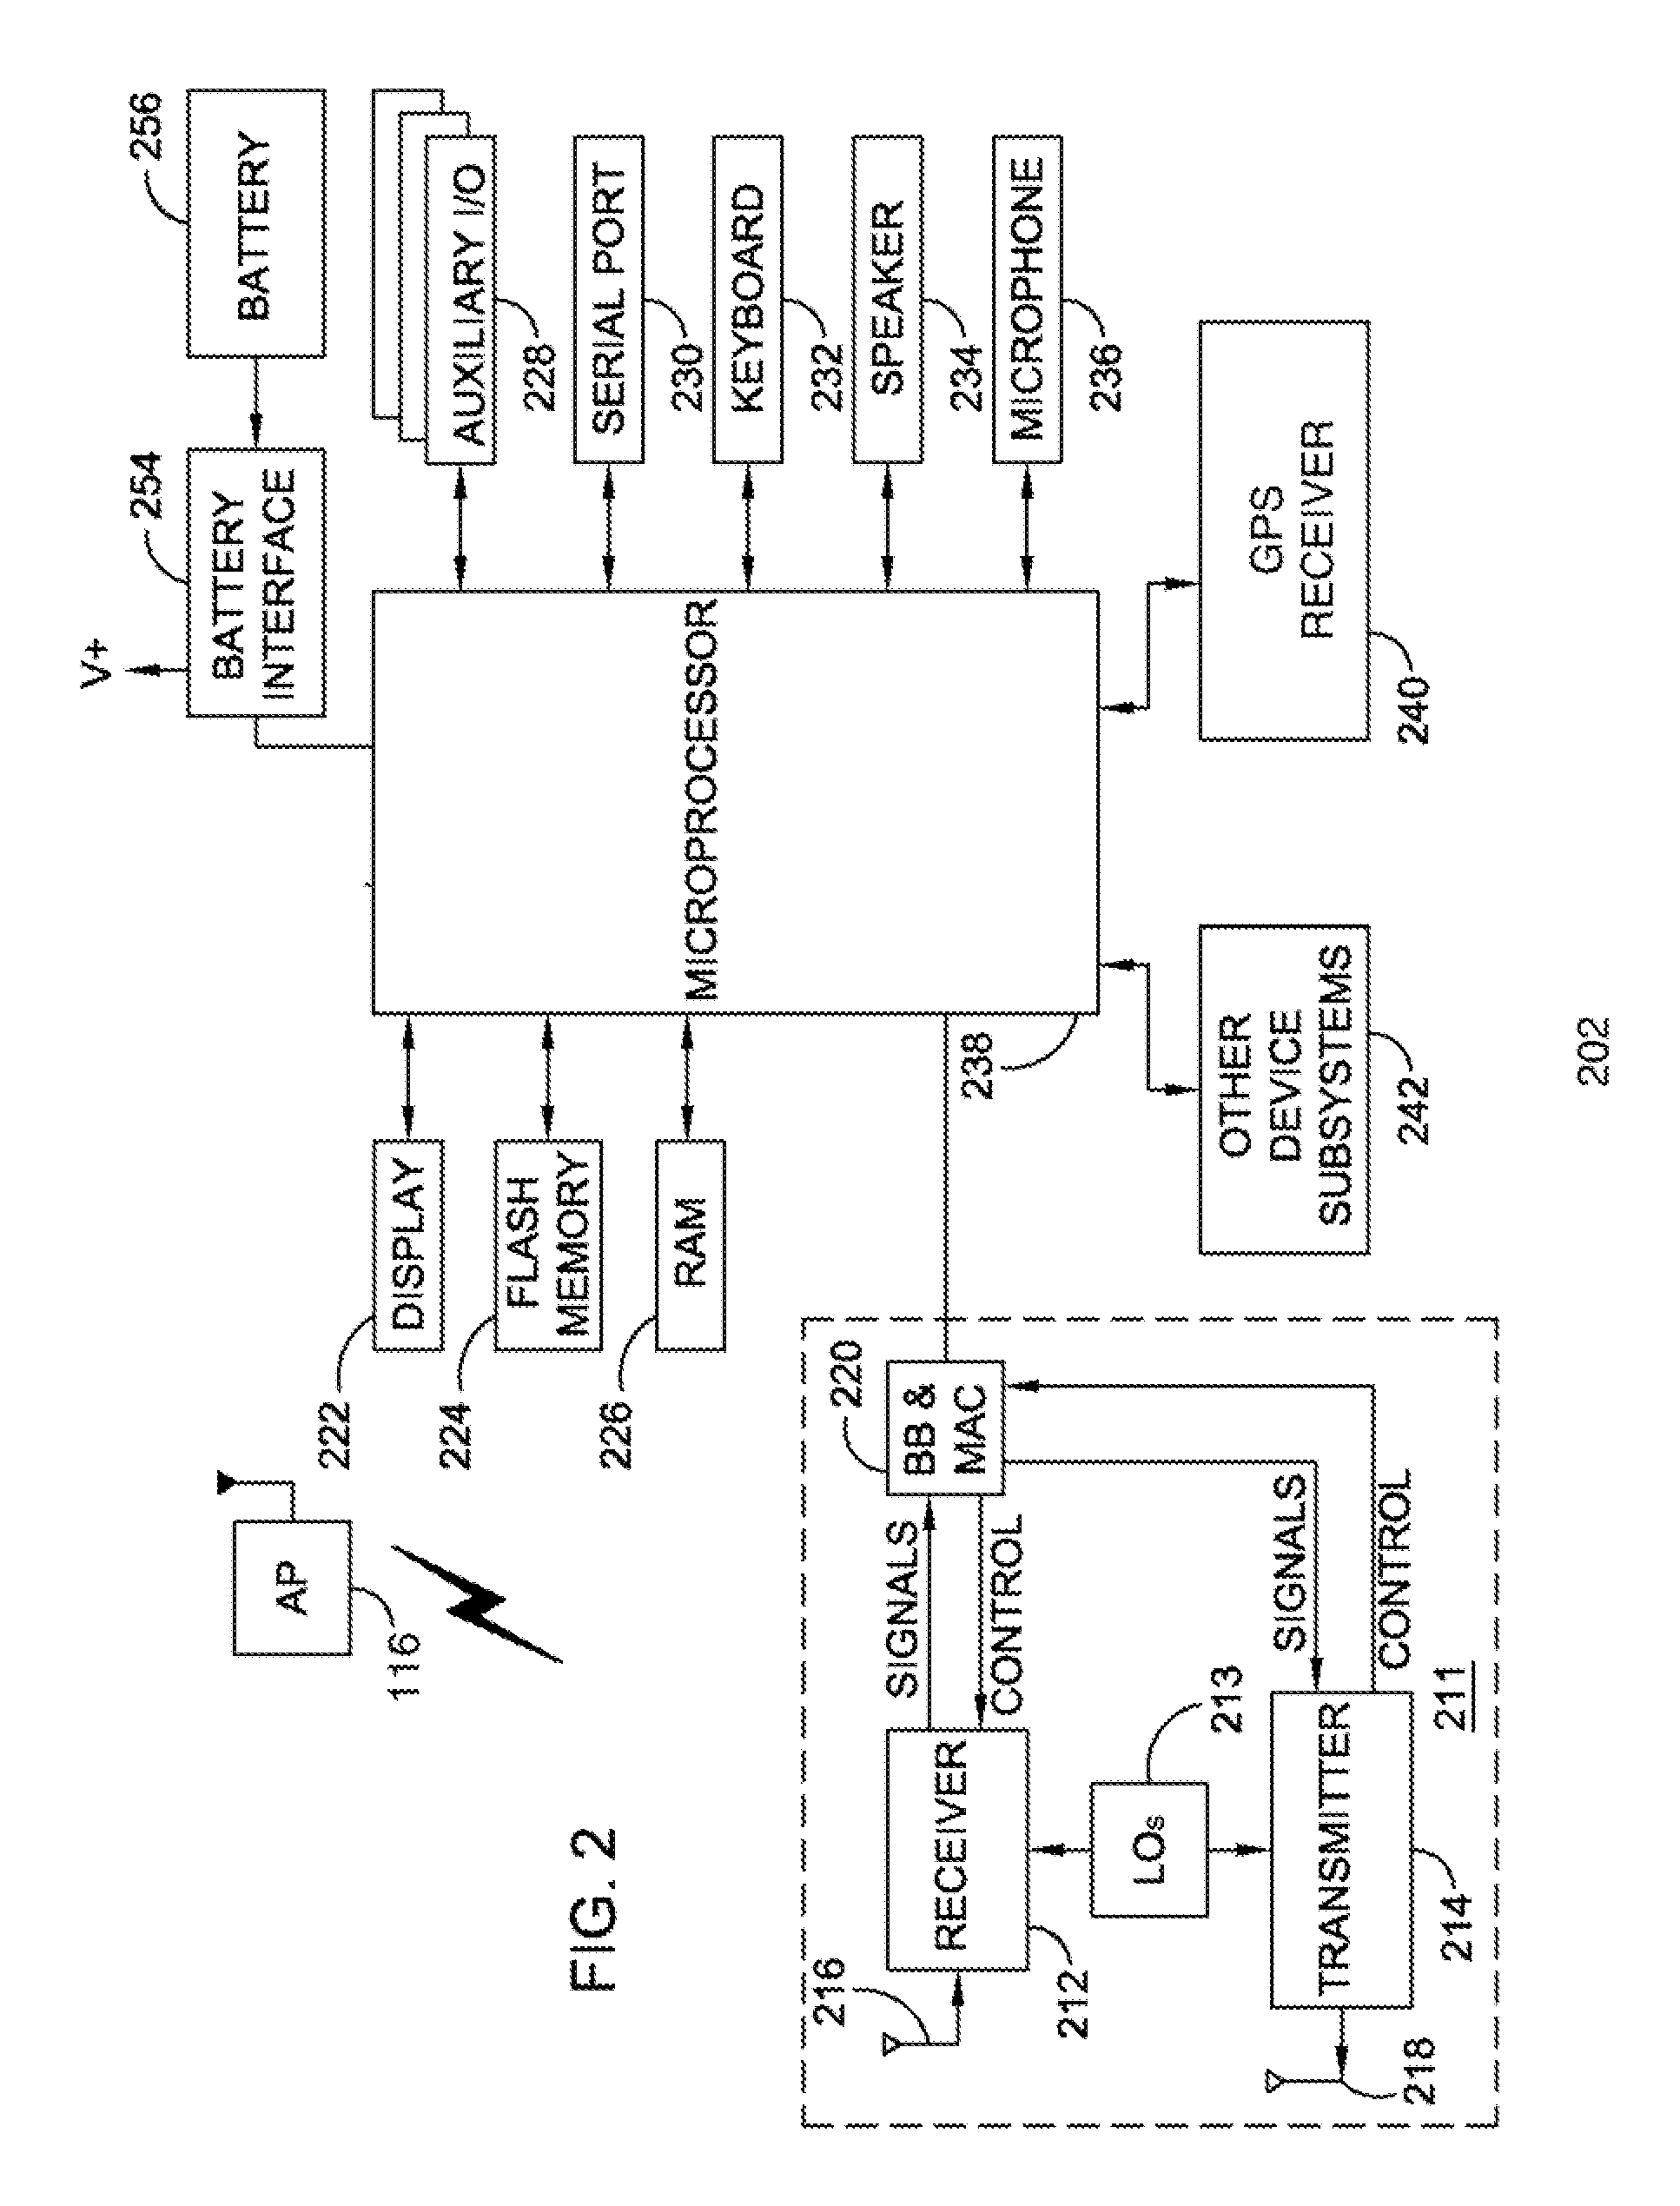 Methods And Apparatus For Use In Establishing A Data Session Via An Ad Hoc Wireless Network For A Scheduled Meeting